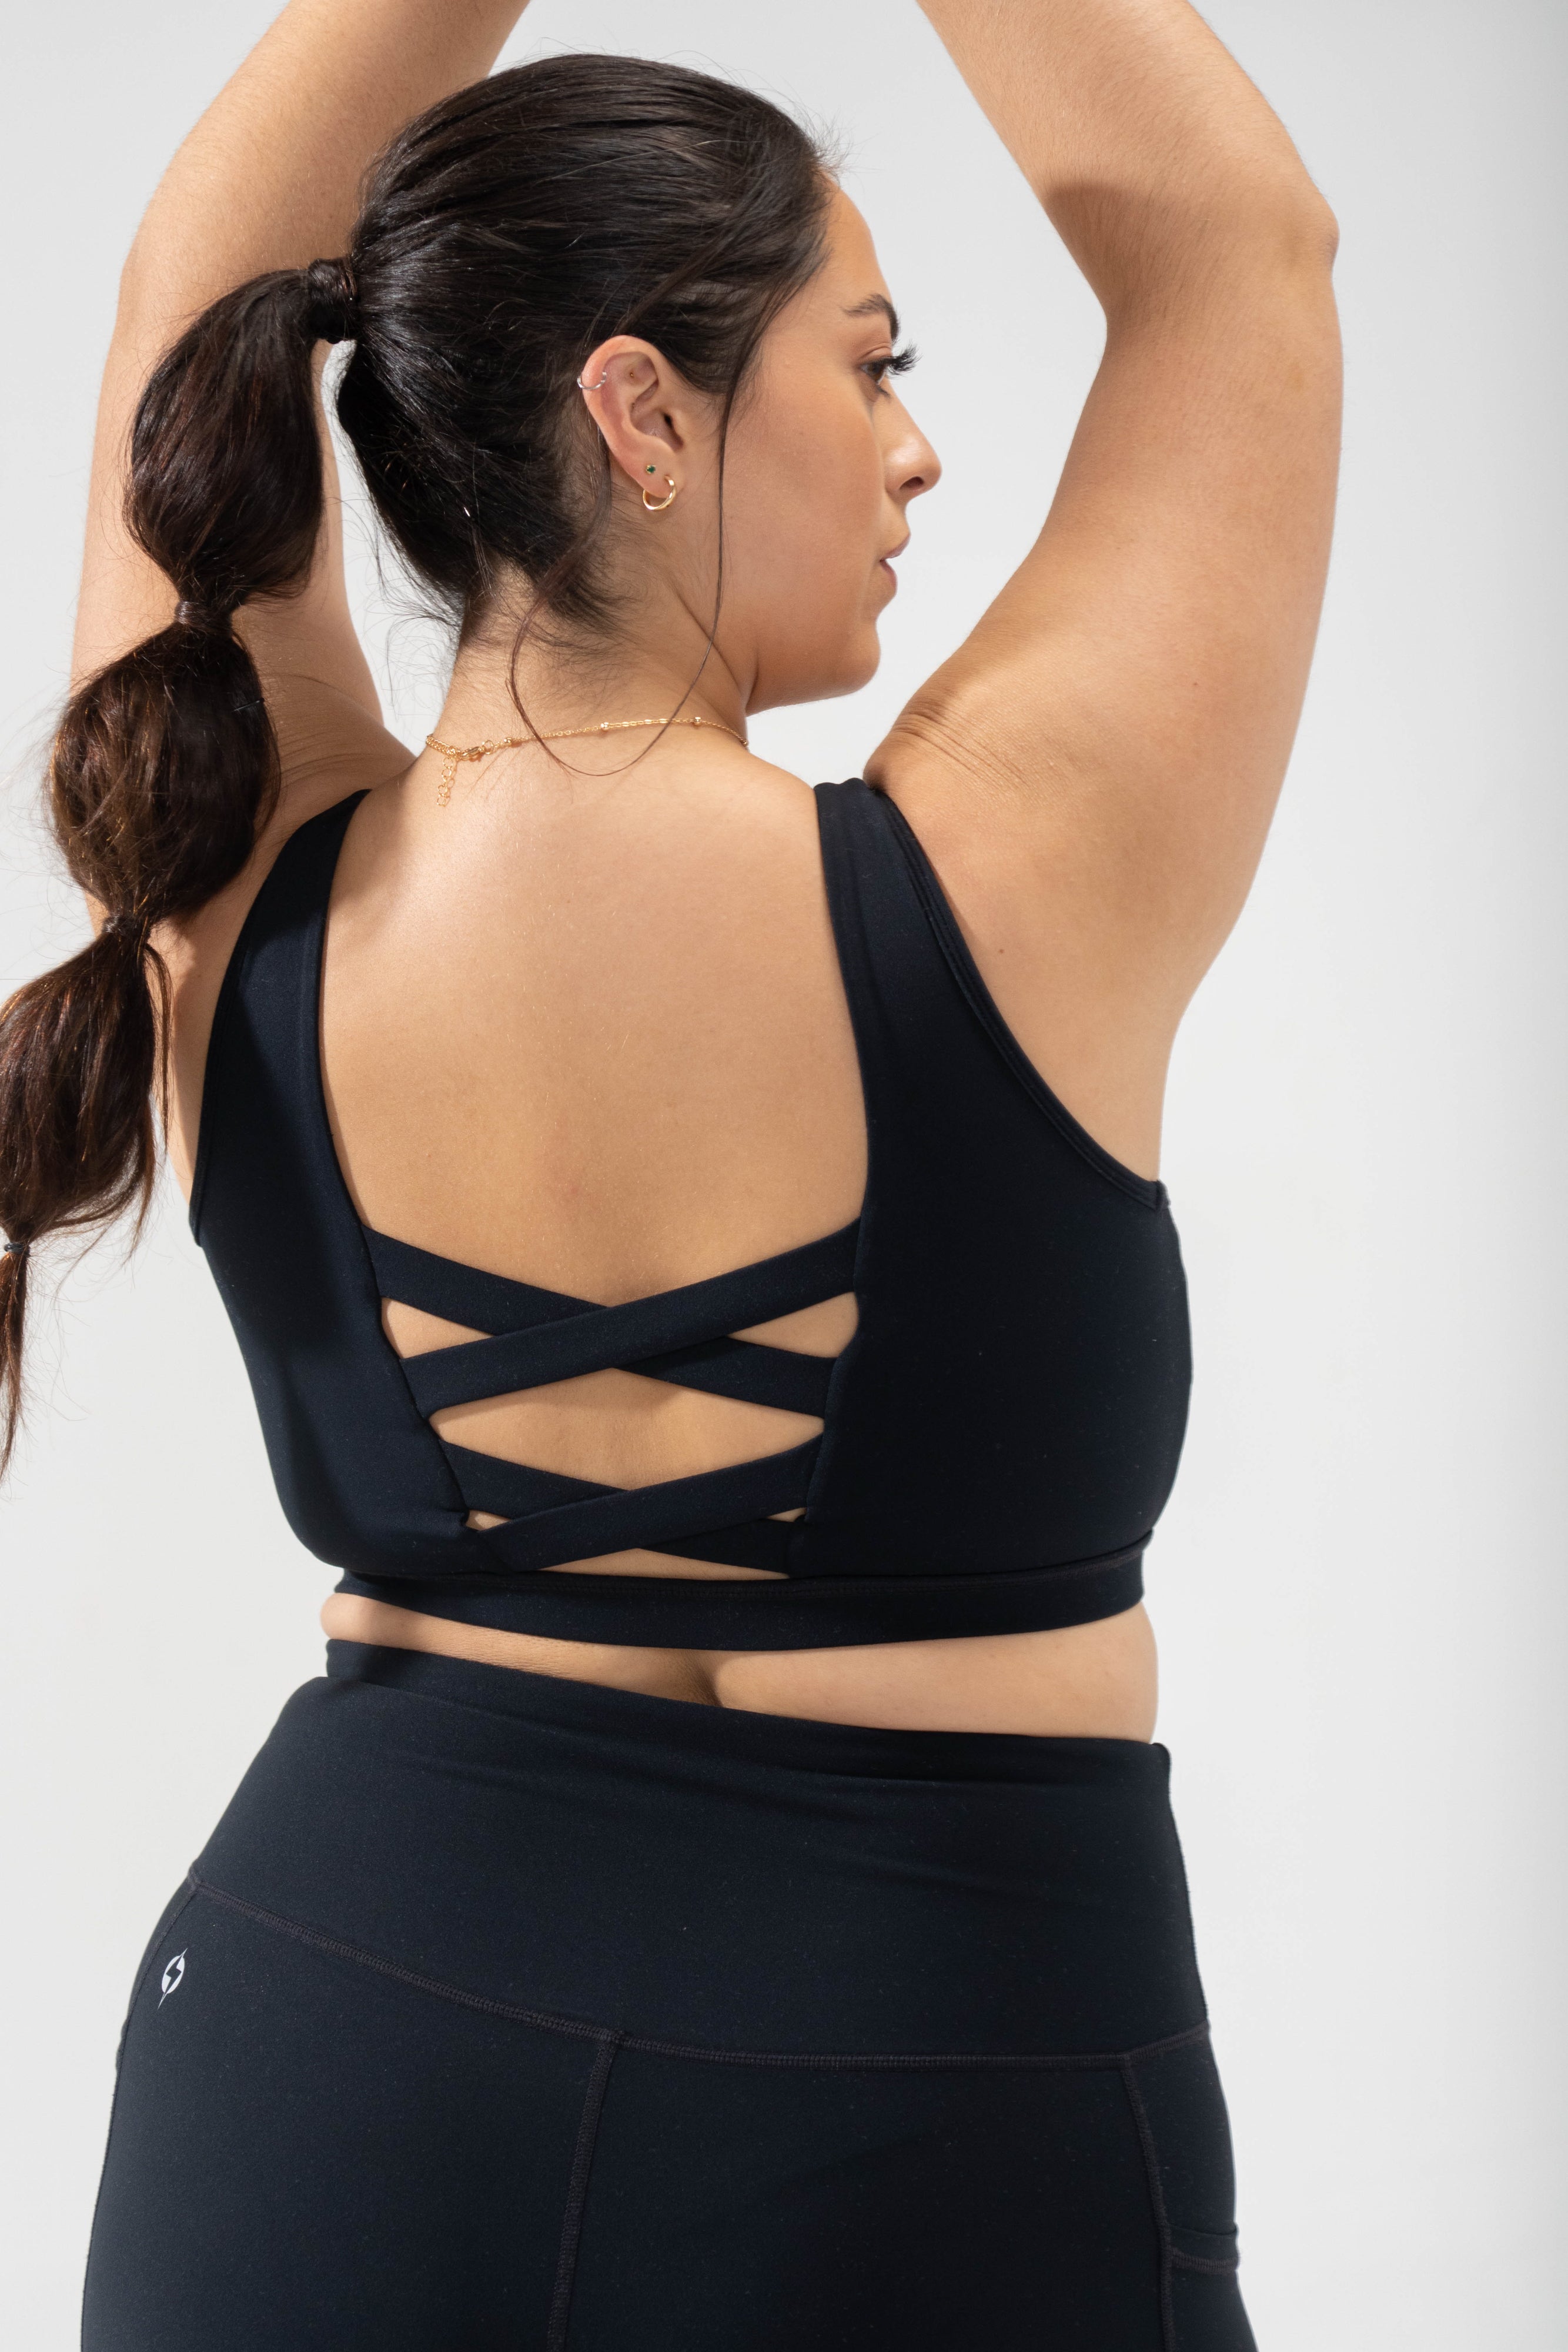 Blogilates - Can you help me build the best sports bra